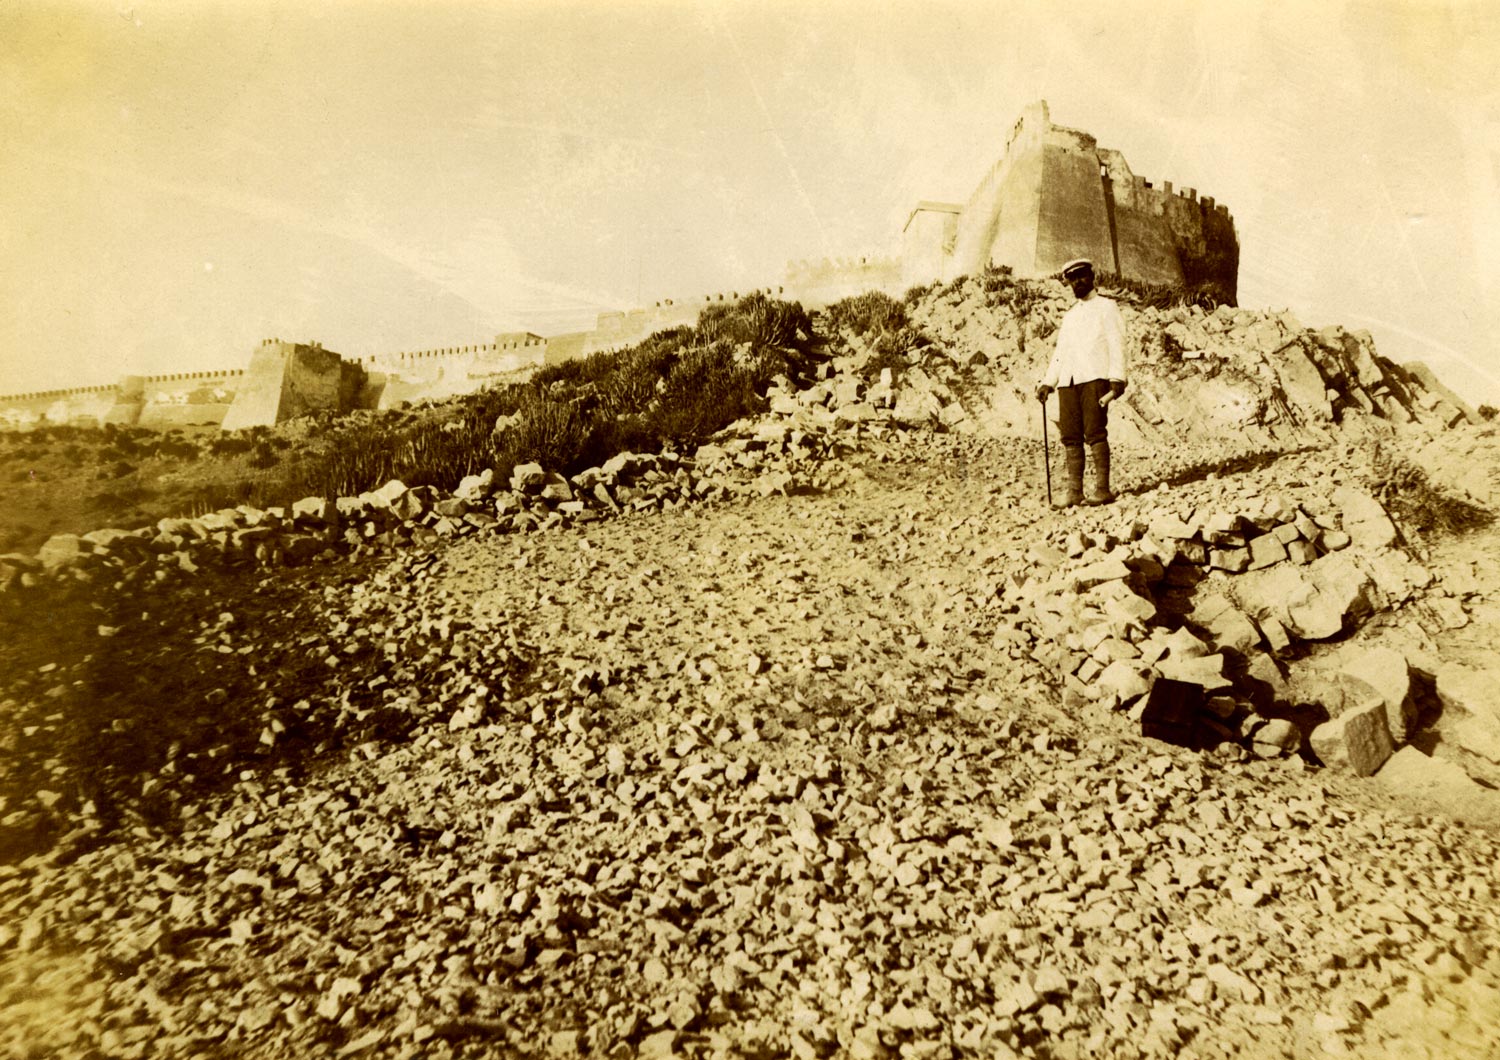 Man coming down from the Kasba on a rocky hill